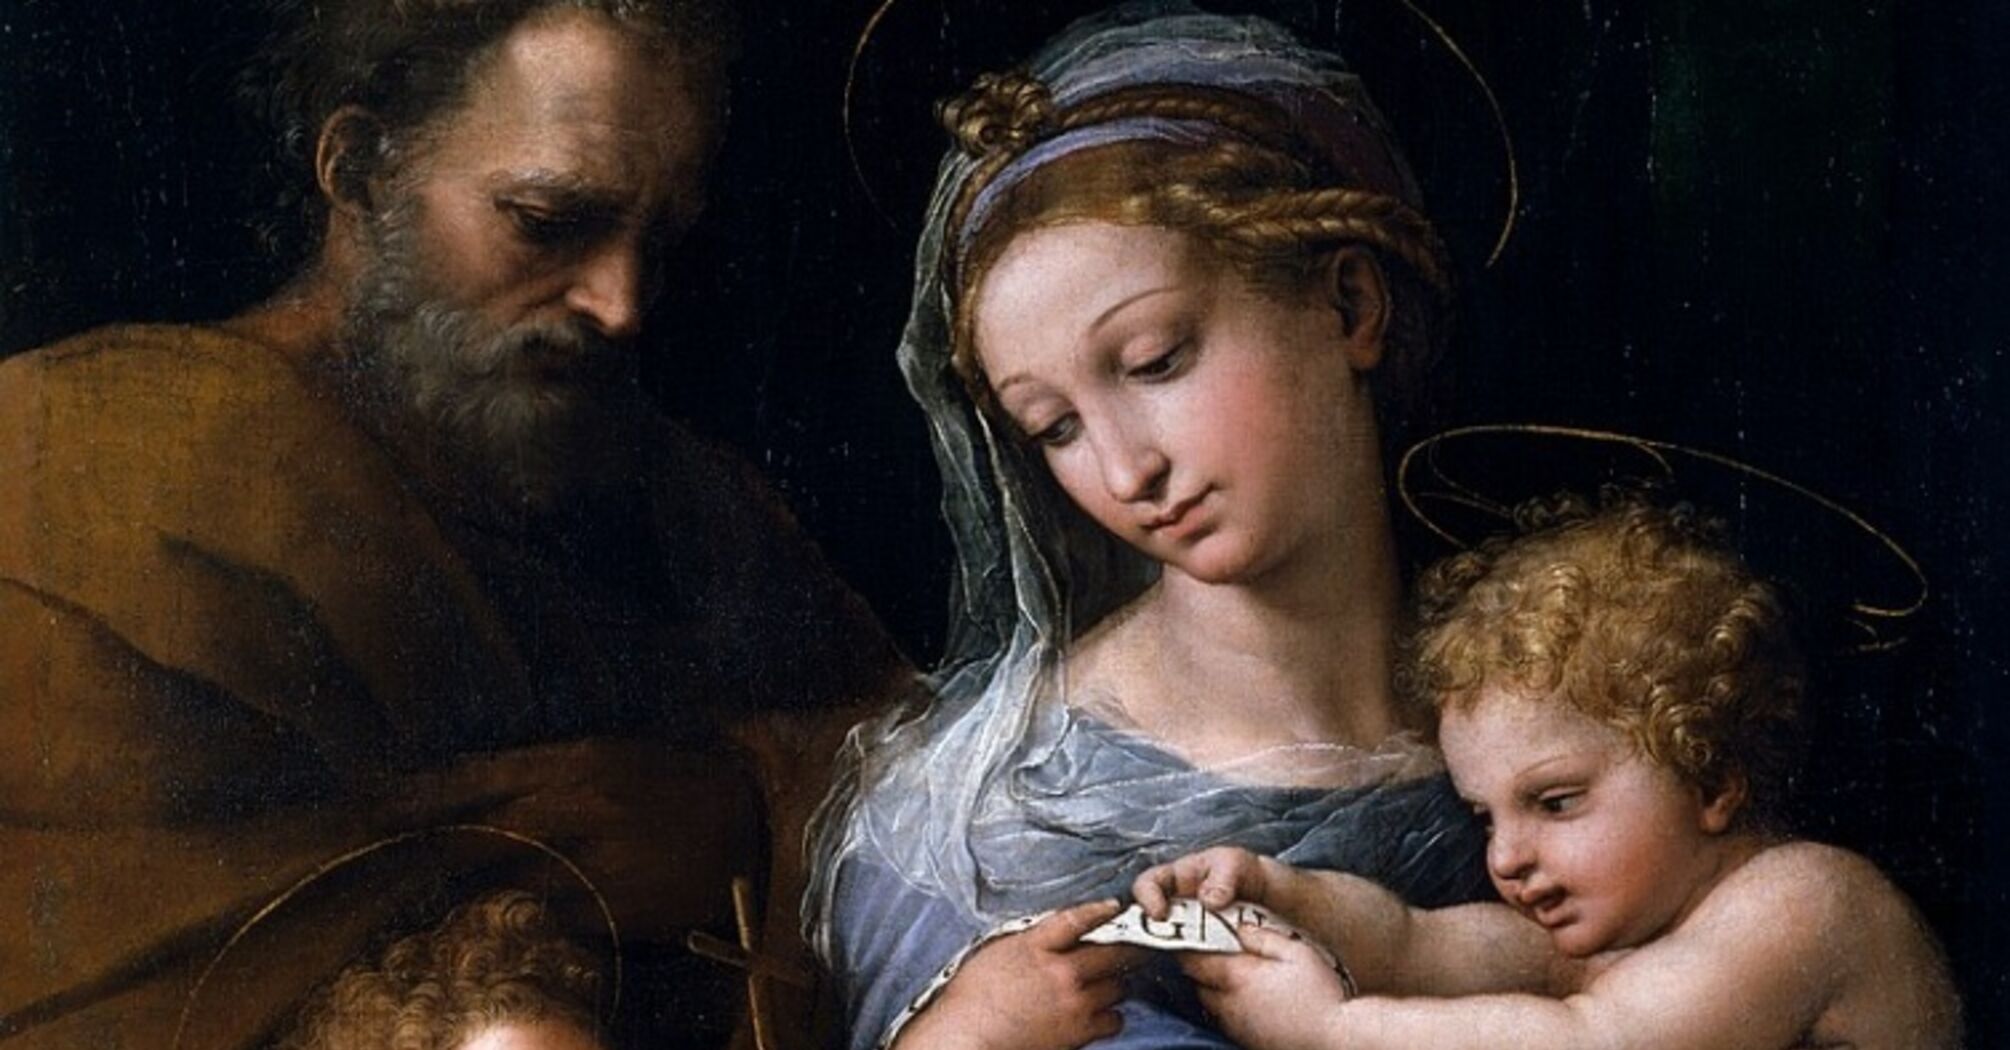 This is impressive: CSI solved the mystery of the artist Raphael